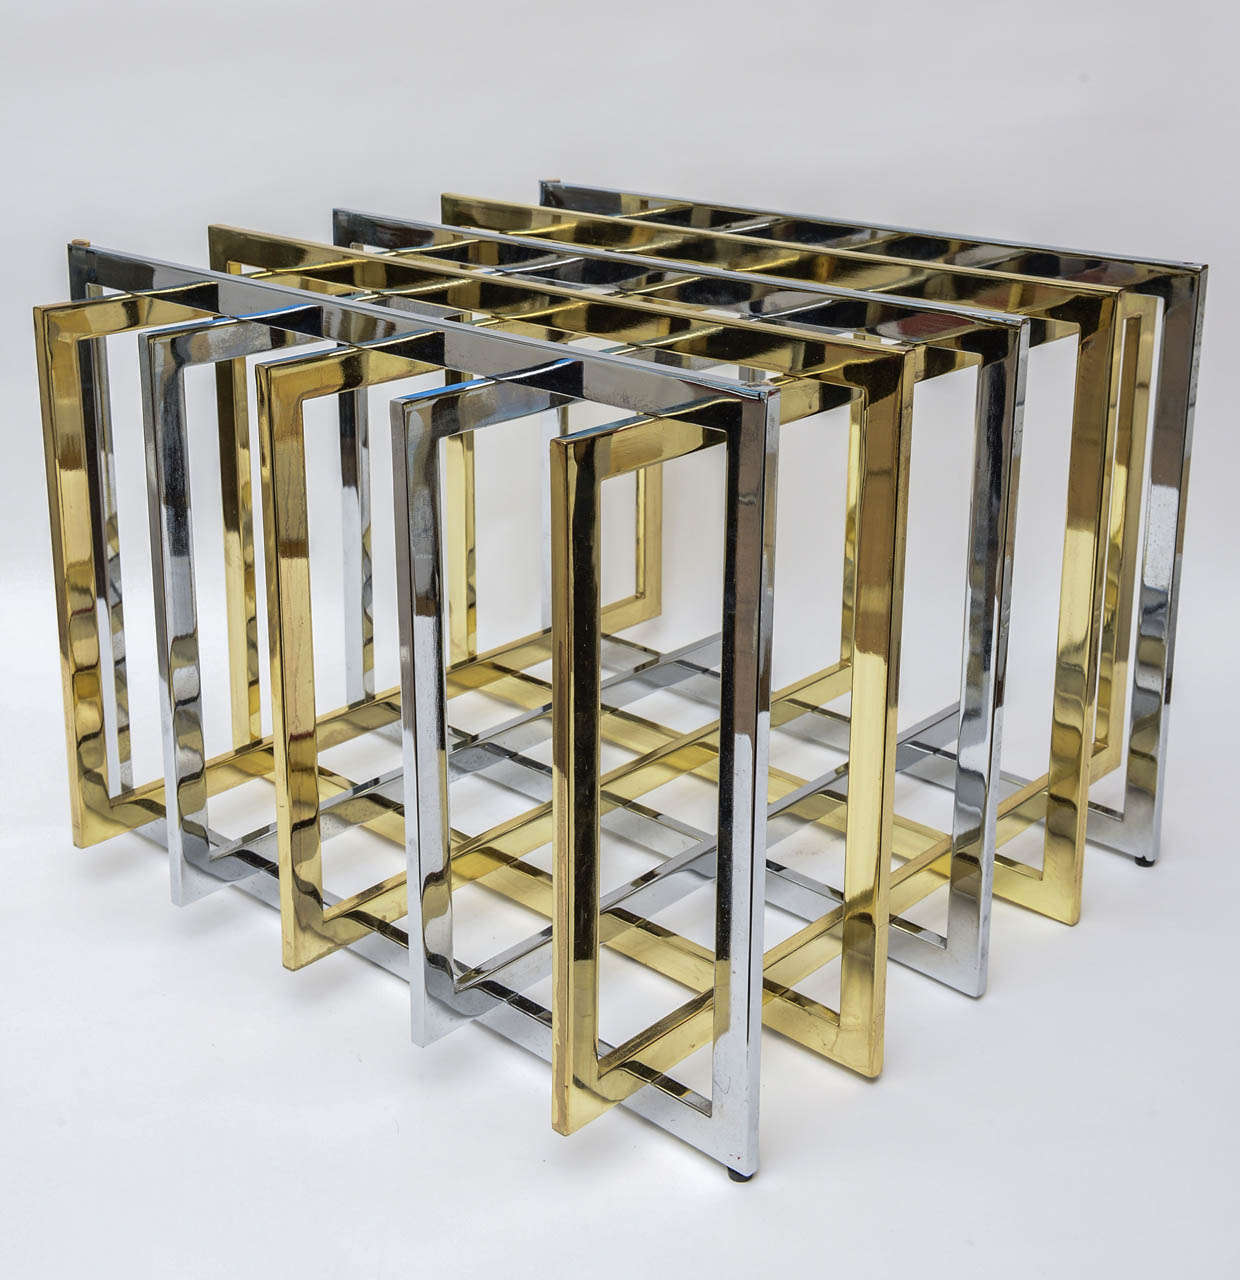 Brass and Chrome meet in a grid /puzzle table base... by Pierre Cardin. Sculptural and wonderful!! The two mixed metals add dimension. This is a classic!!!
We do not have glass for this one.

Please note: we have another one to make a great